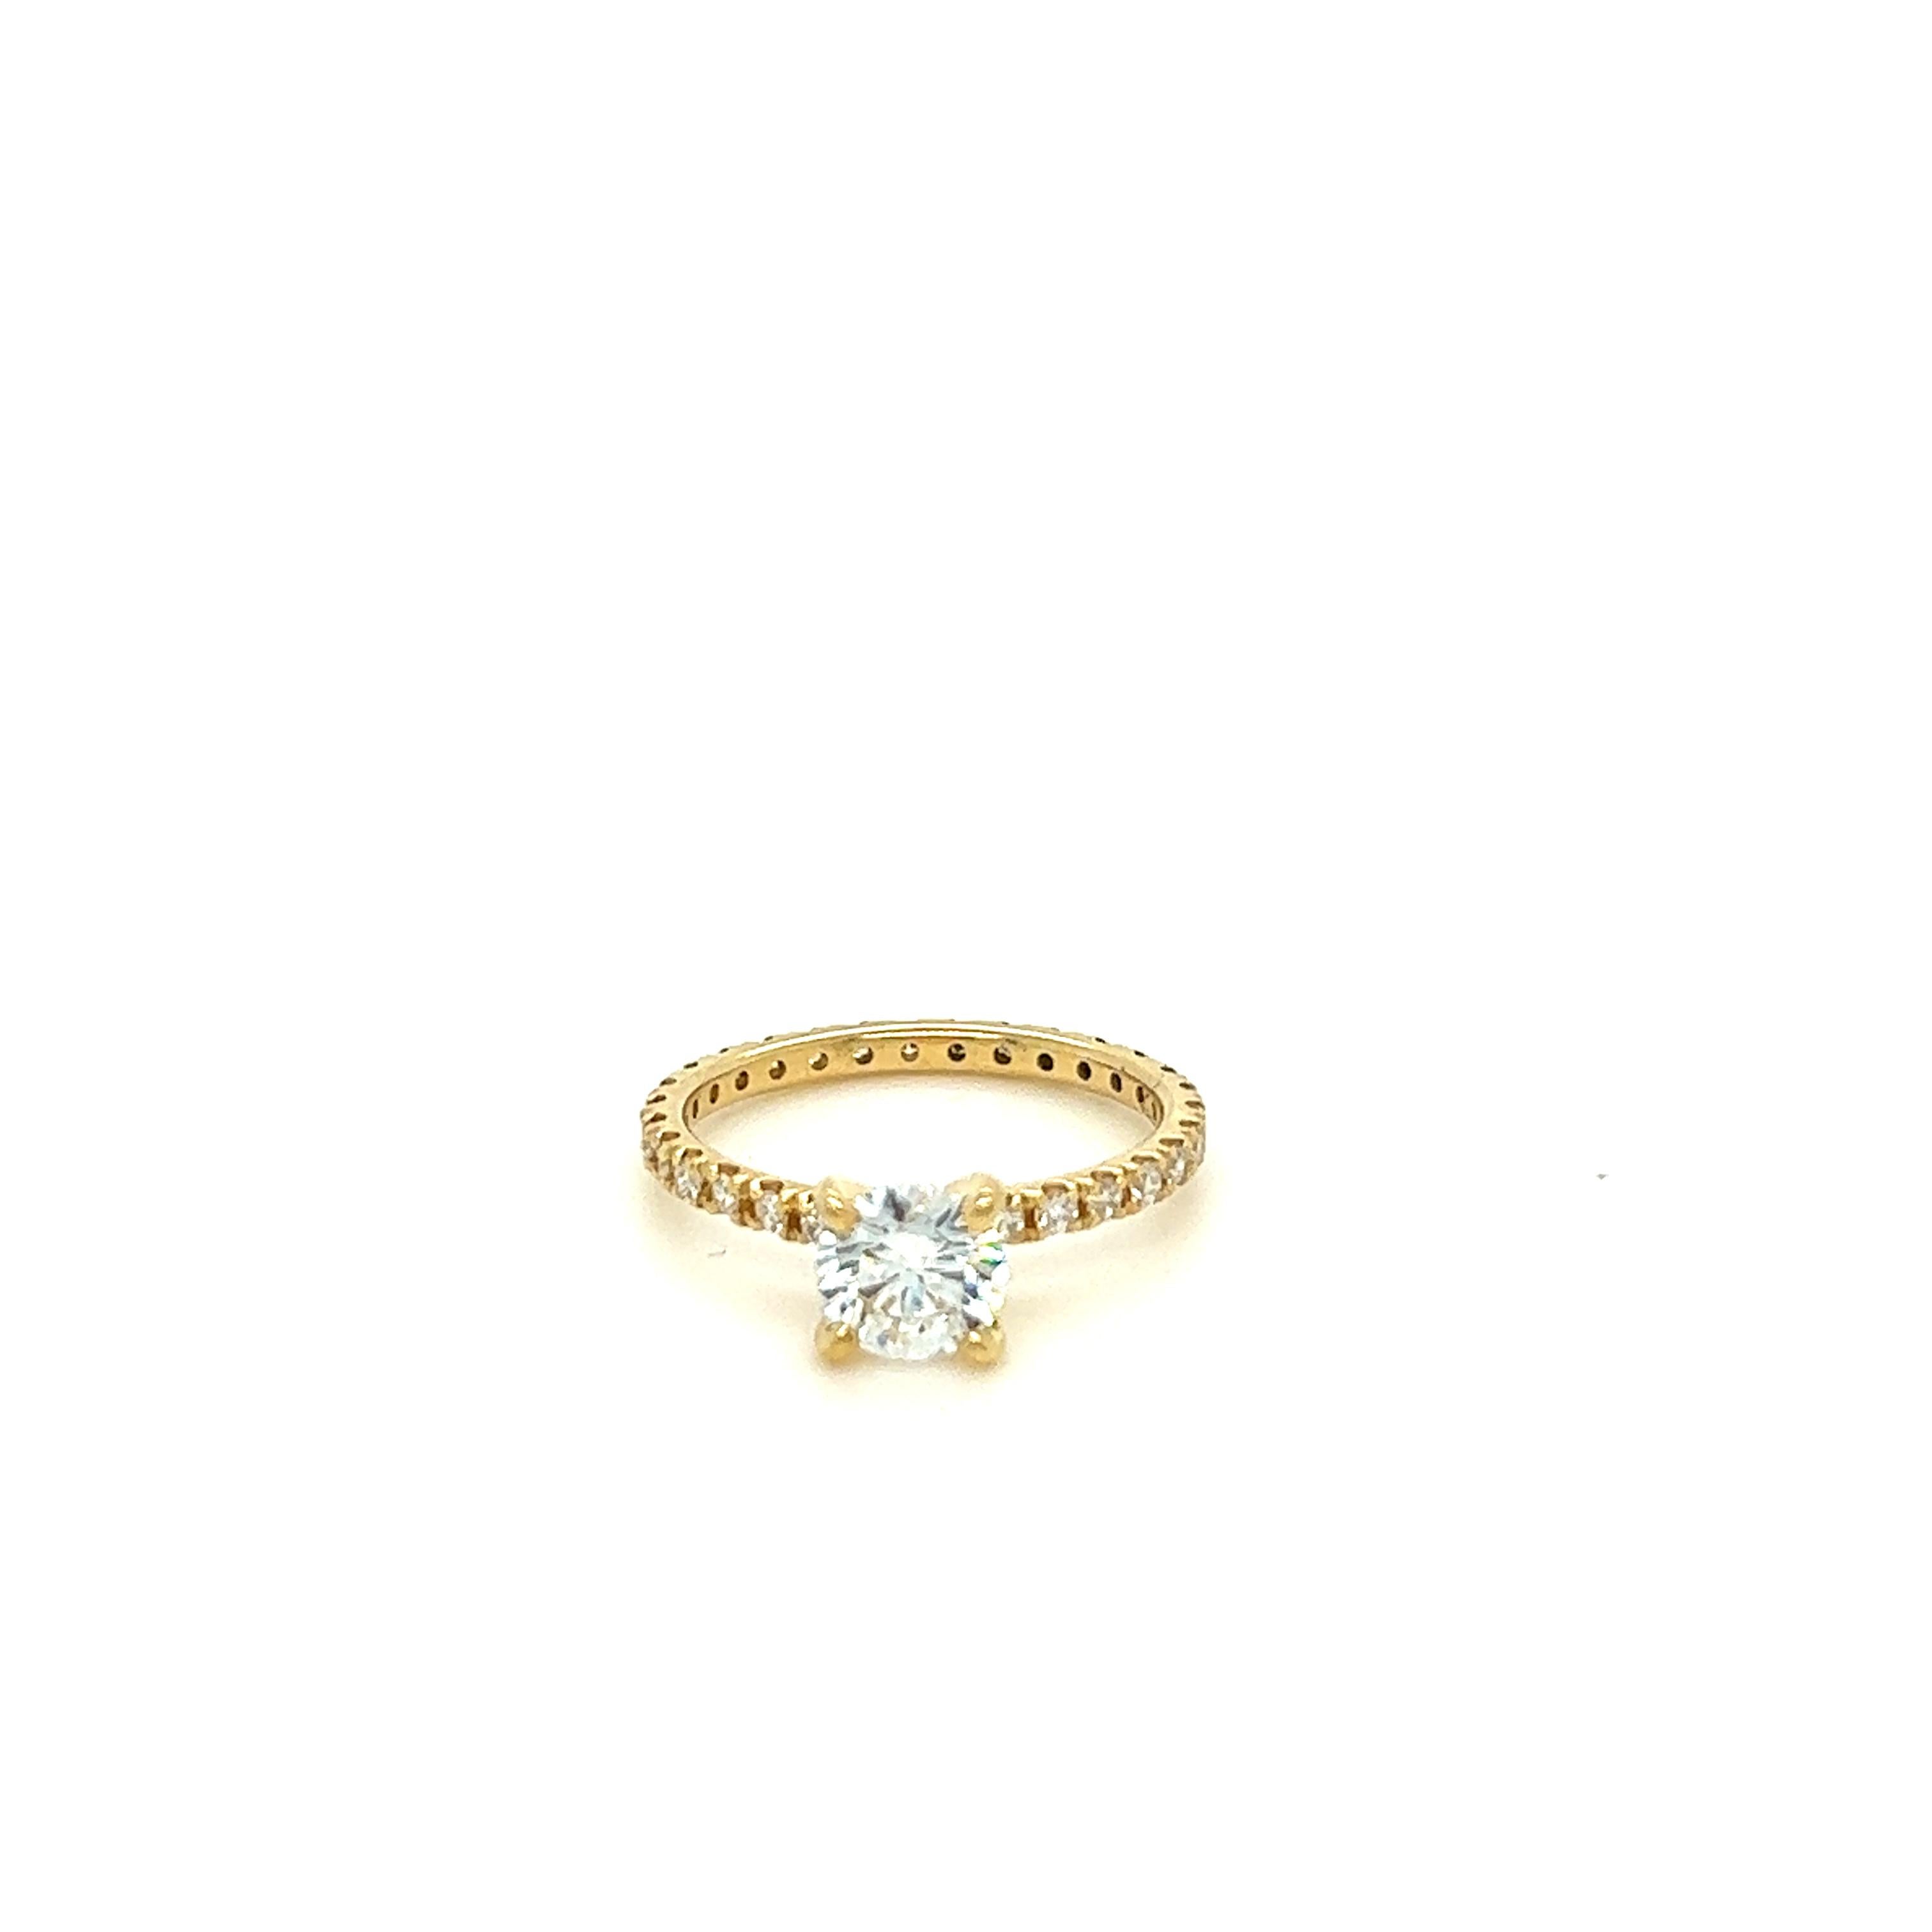 Unique features: 
Yellow Gold Diamond Ring 0.80ct

Metal: 18ct Yellow Gold
Carat: 0.80ct
Colour: G
Clarity: SI2
Cut: N/A
Weight: N/A
Engravings/Markings: N/A

Size/Measurement: N/A

Current Condition: Excellent

Accompanied by: This GIA Yellow Gold